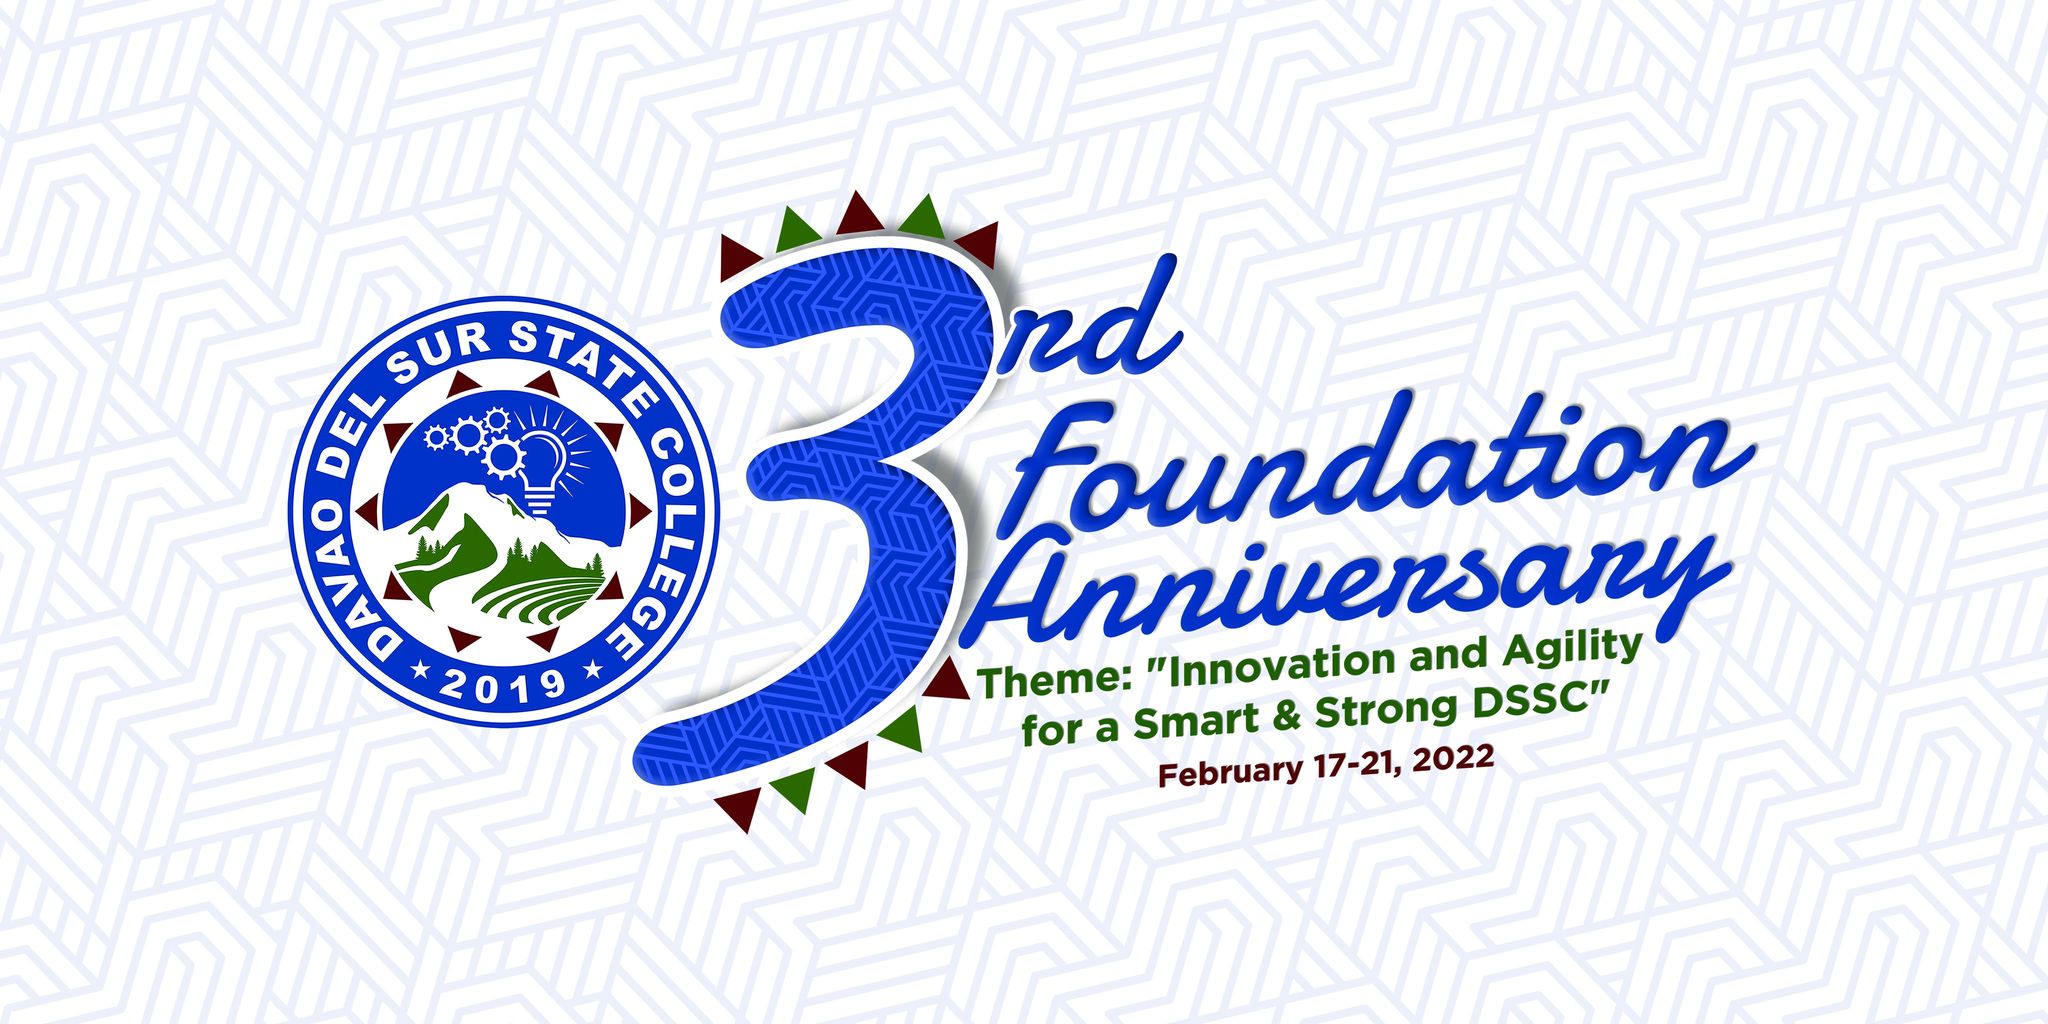 Davao del Sur State College (DSSC) is celebrating its 3rd Foundation Anniversary on February 17-21, 2022.   With the theme “Innovation and Agility for a Smart & Strong DSSC,” the DSSC Foundation Anniversary Organizing Committee prepare set of activities for all stakeholders of the college such as Sociocultural activities, Community Engagement Day, Research, and Development and Extension Day.